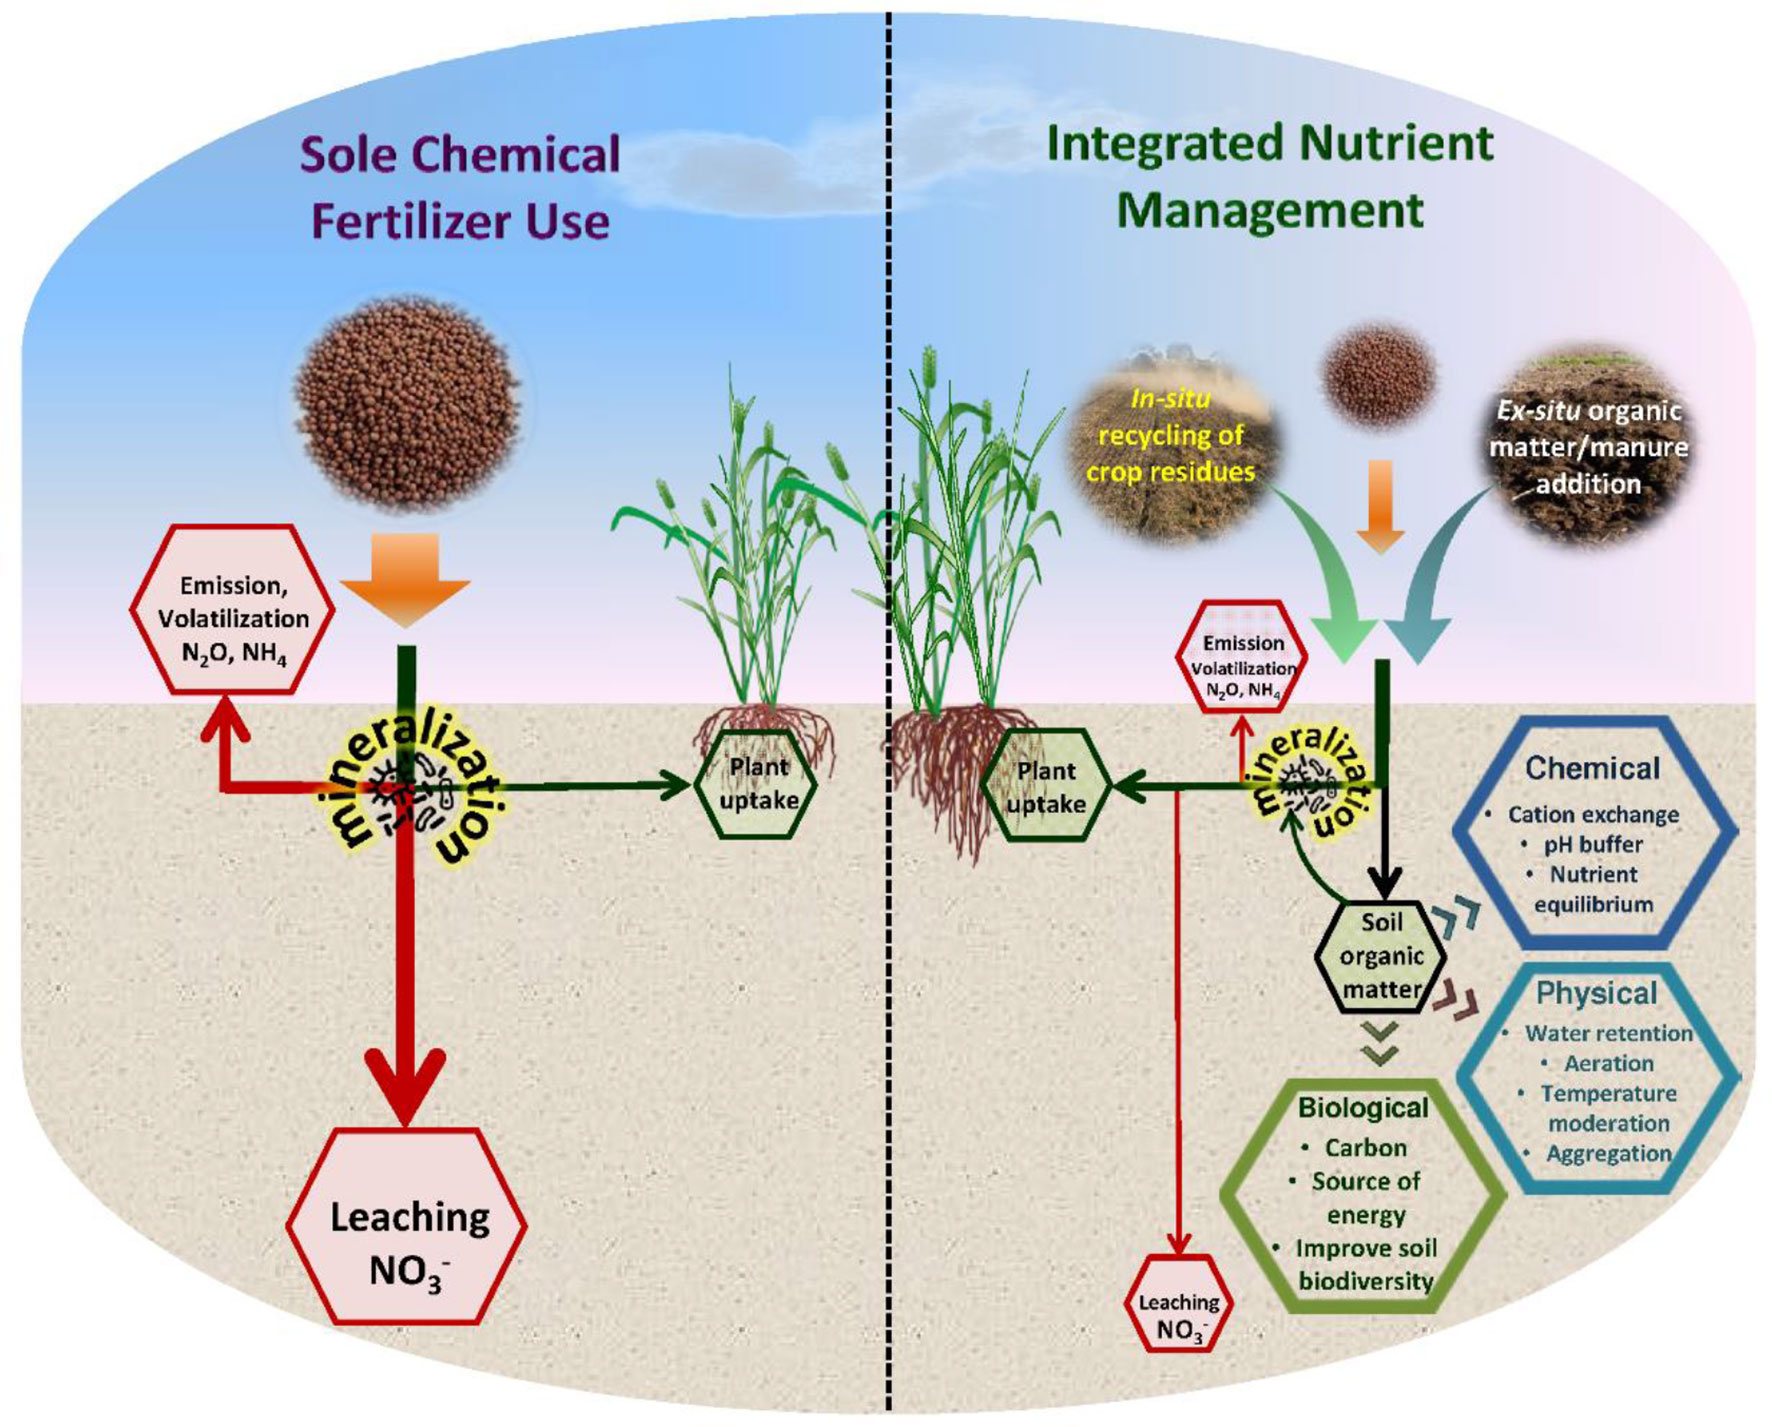 research article on nutrient management